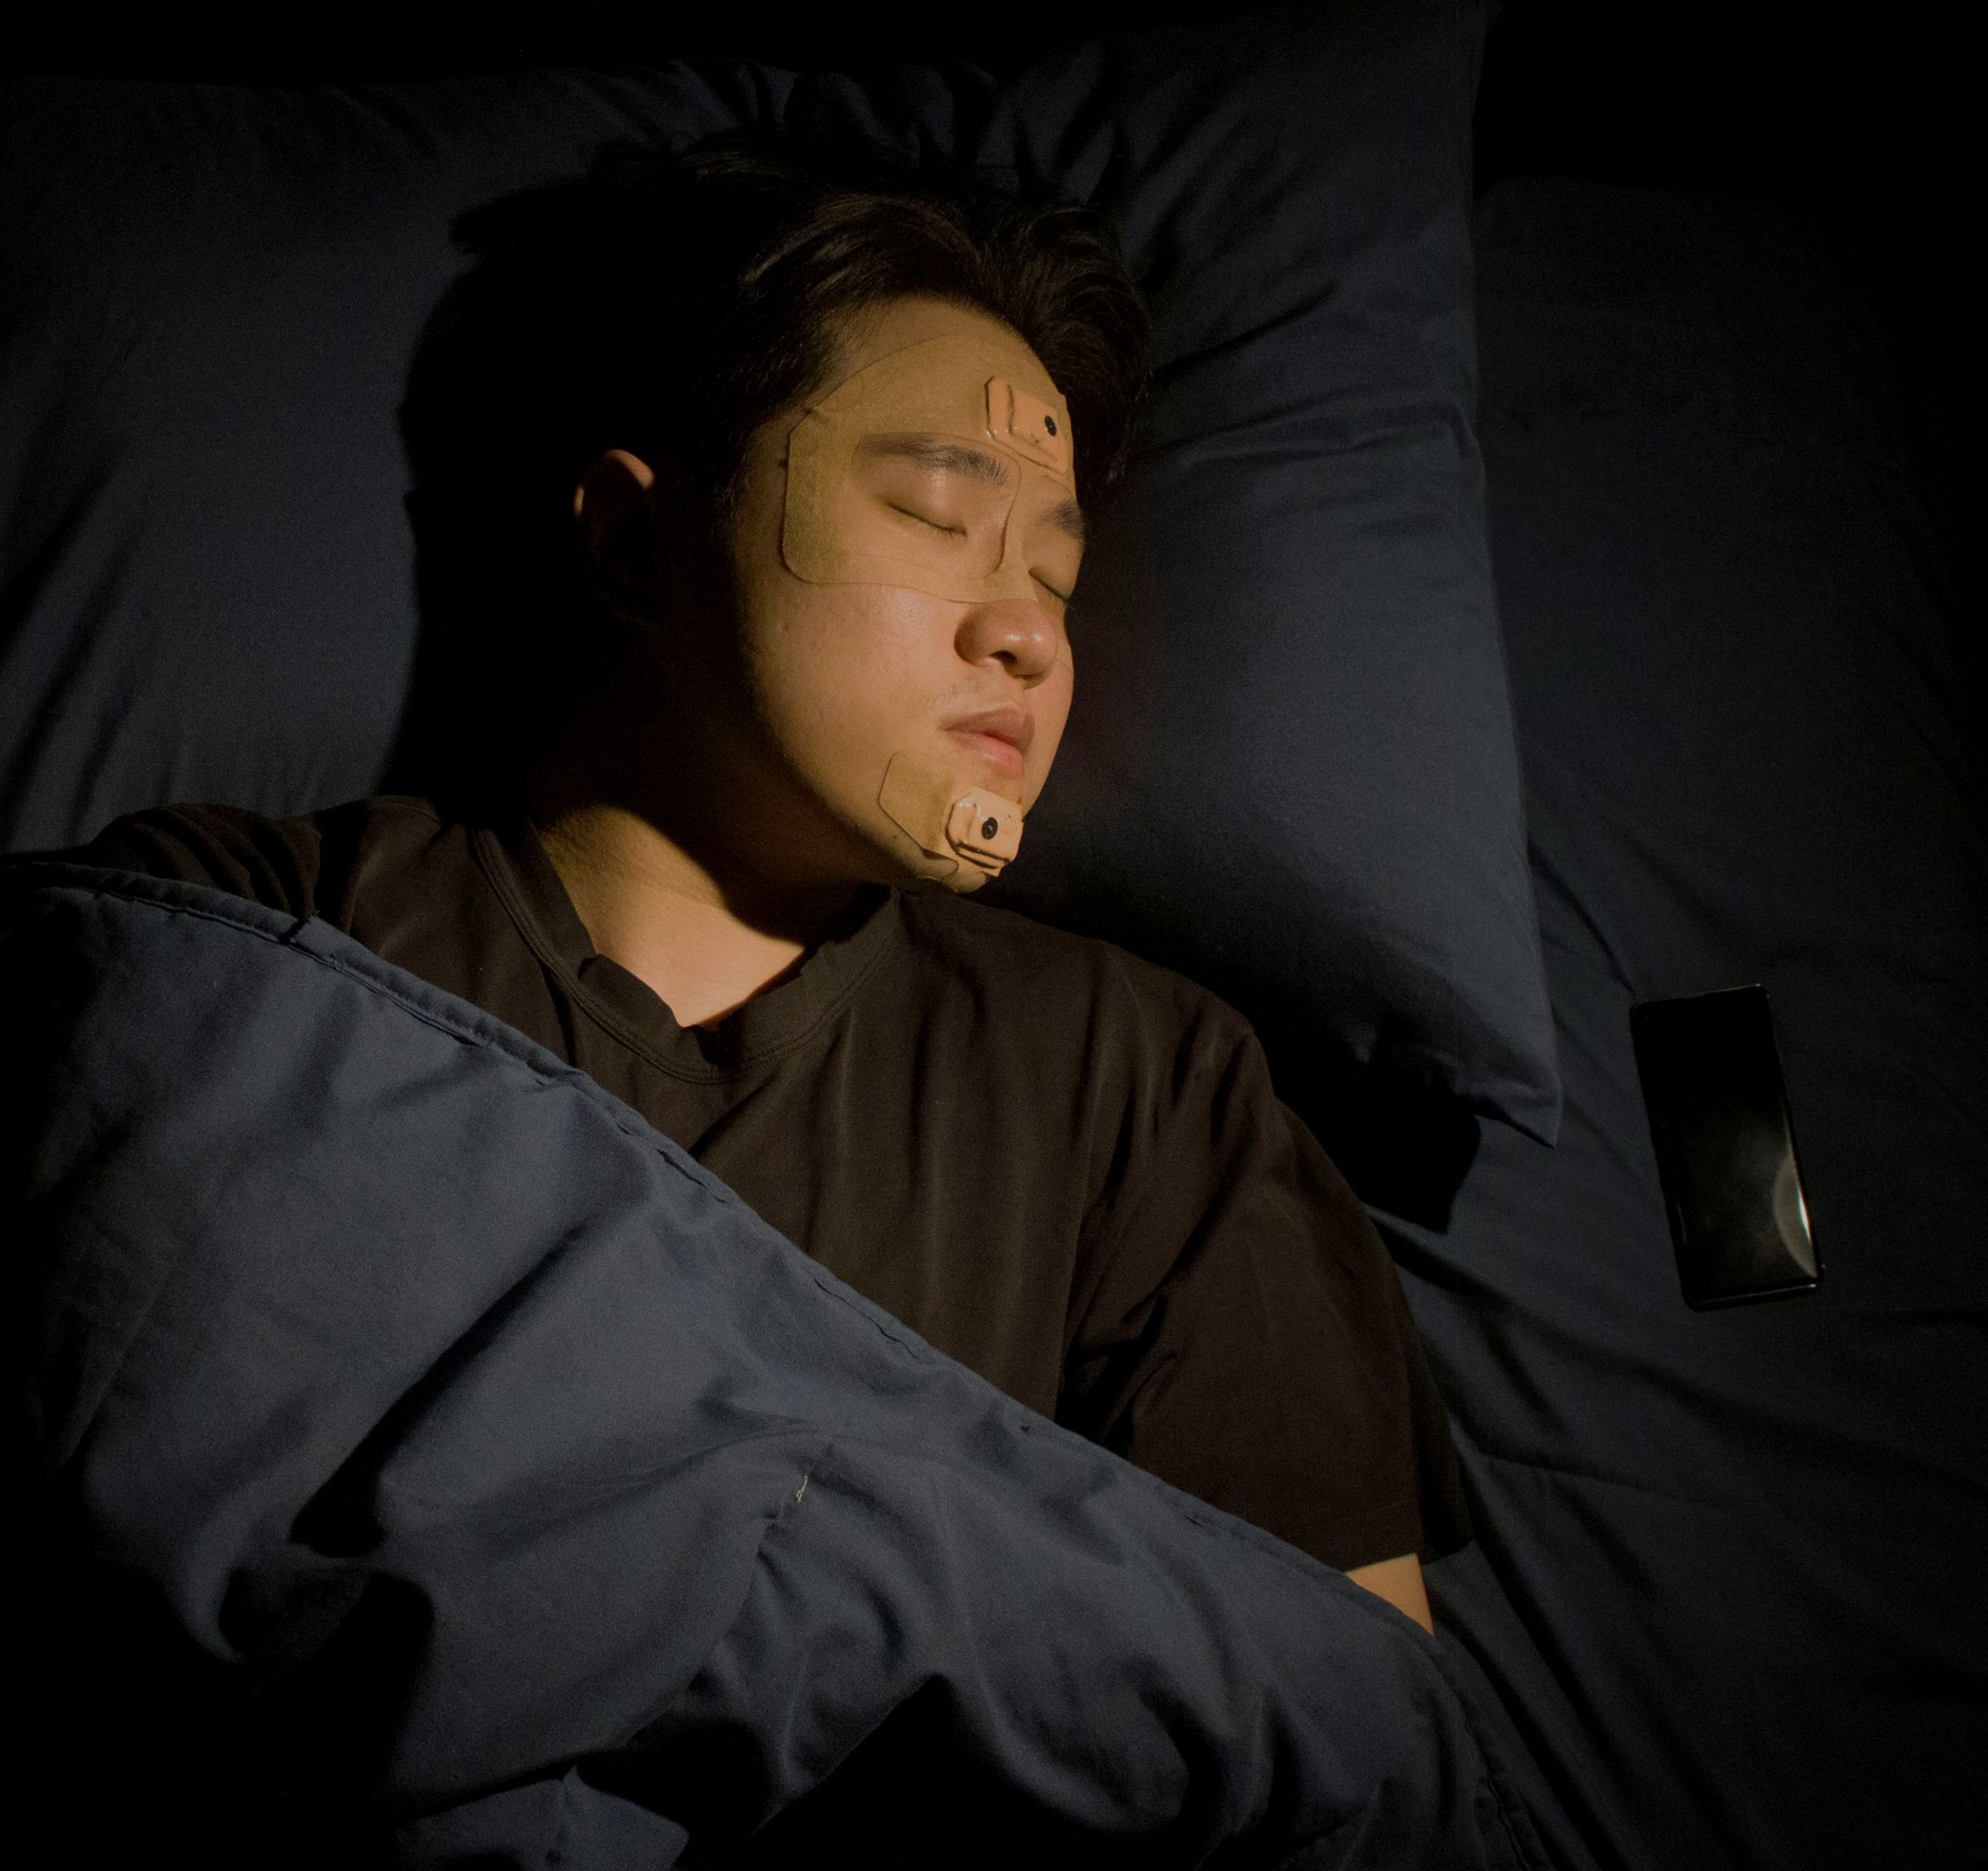 Researchers Develop Wireless Monitoring to Detect Sleep Apnea at Home